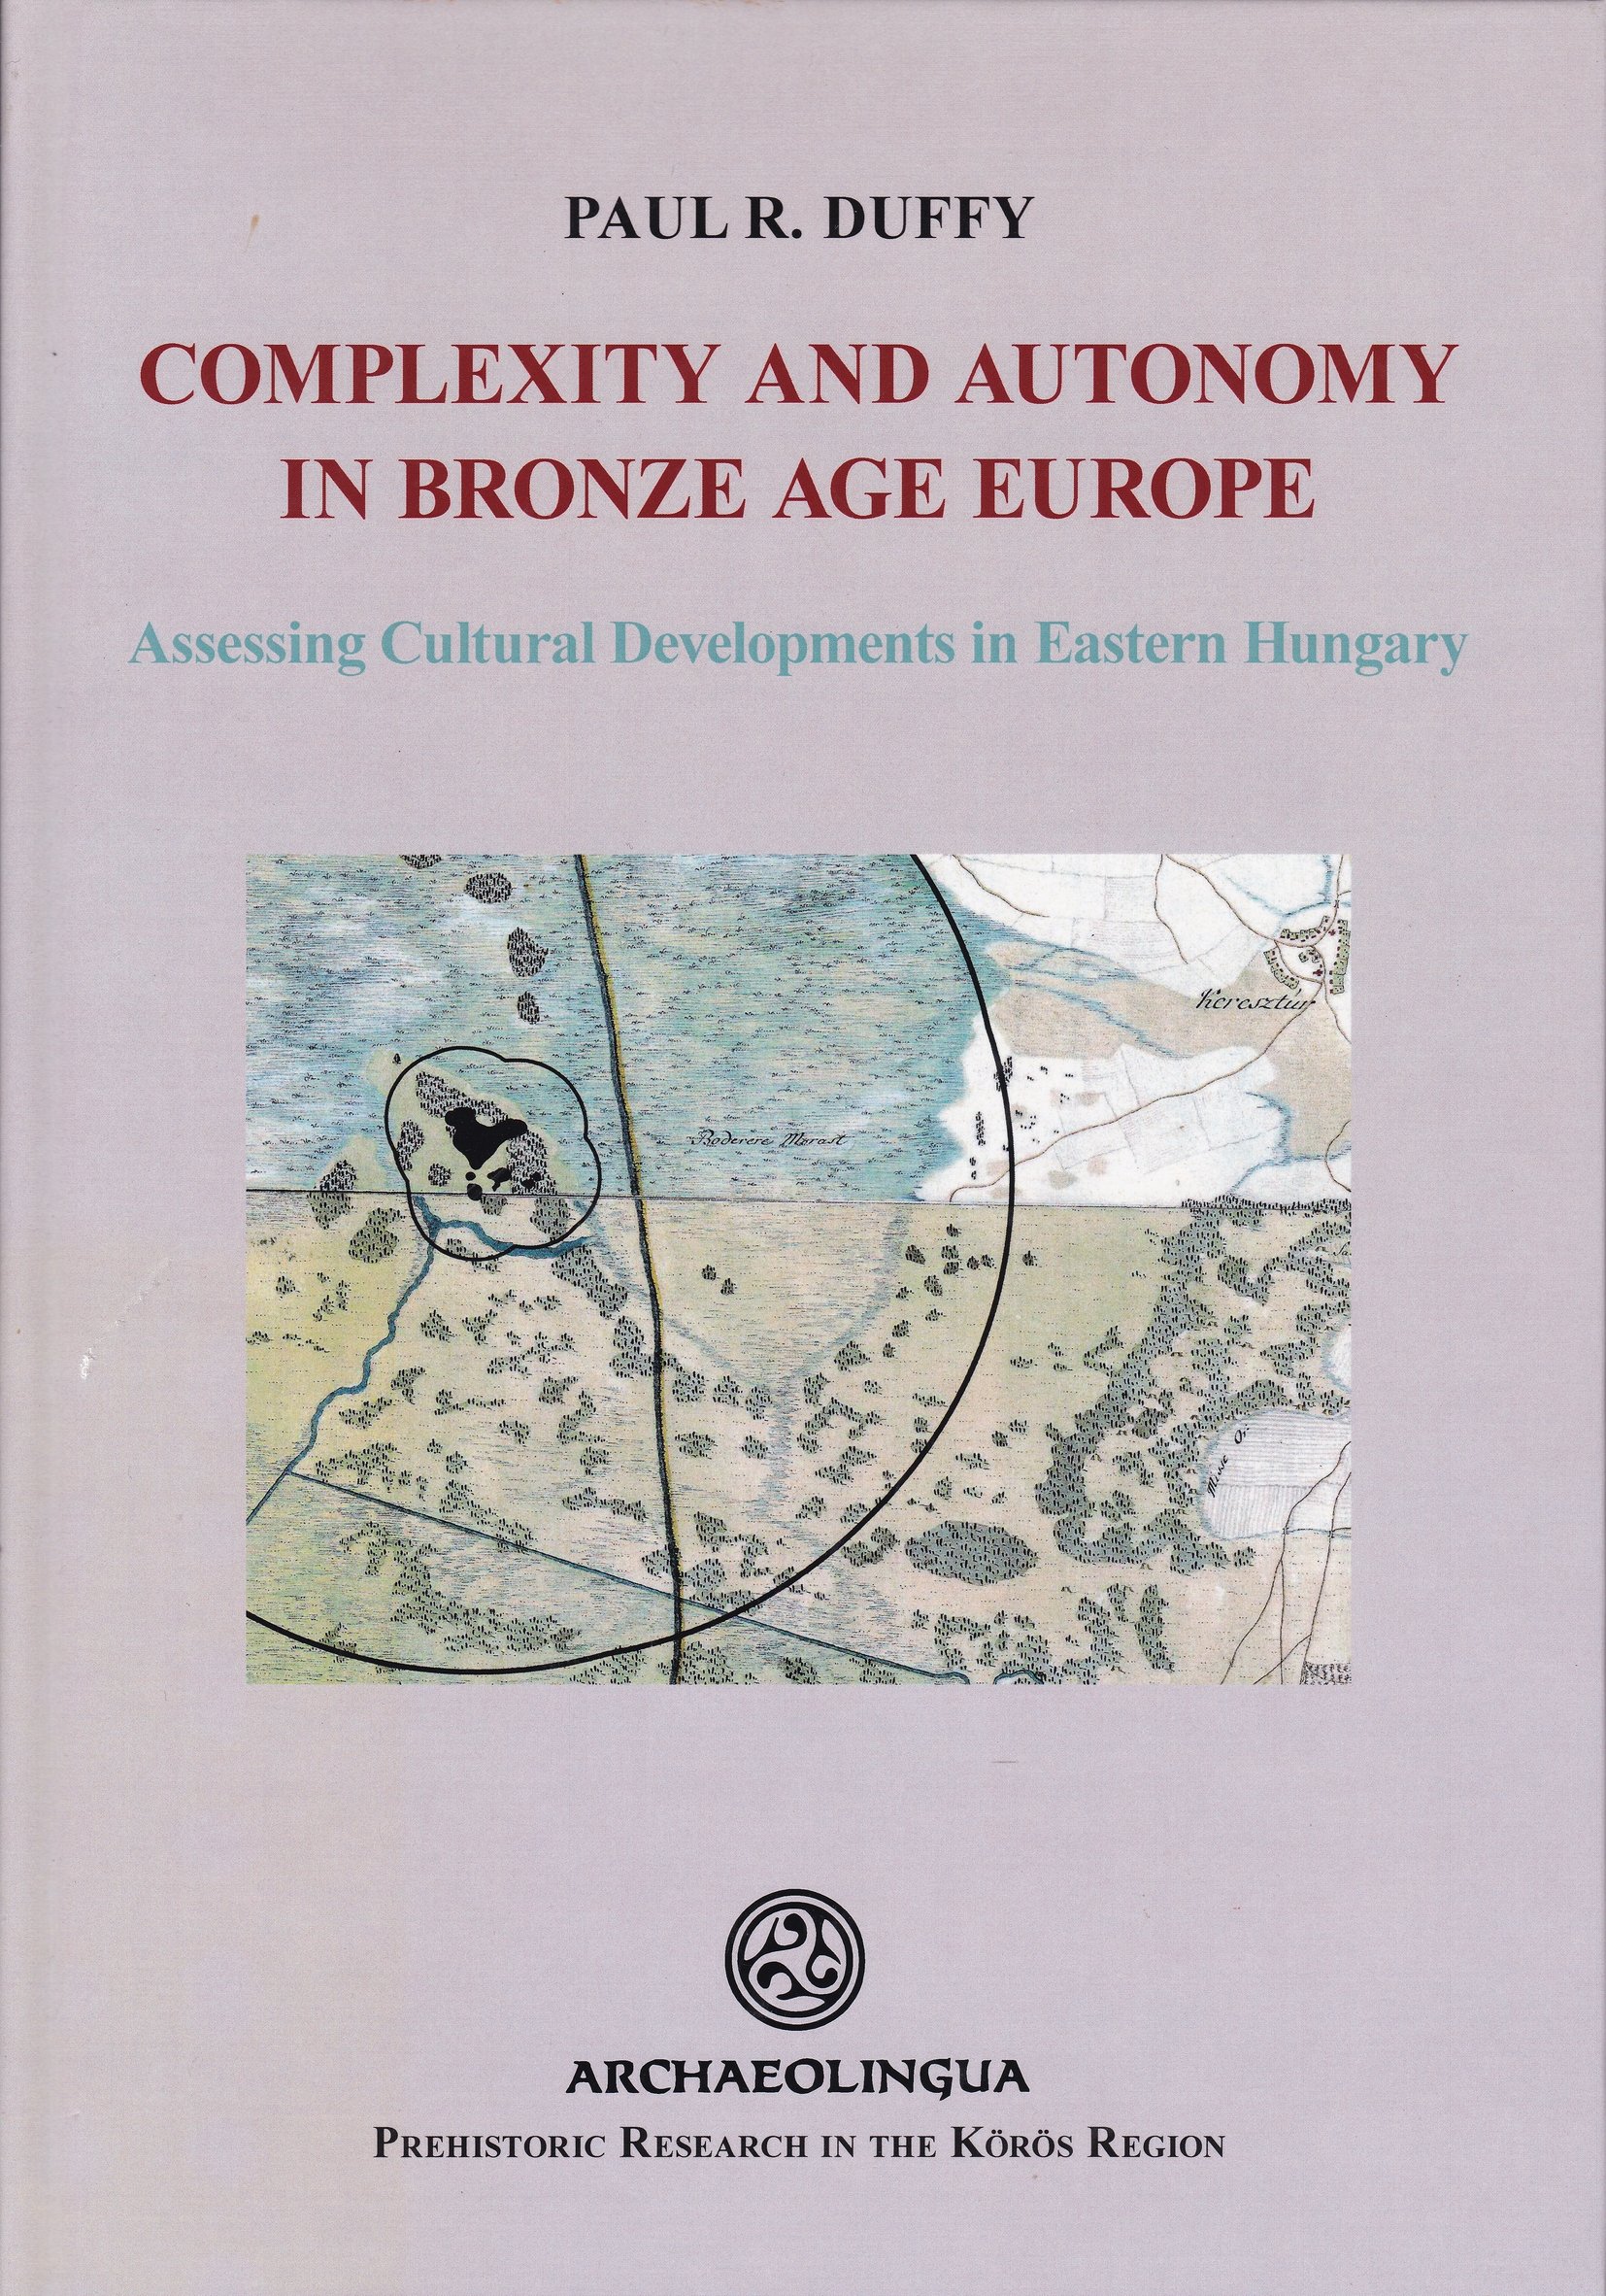 Paul R. Duffy: Complexity and Autonomy in Bronze Age Europe. Assessing Cultural Developments in Eastern Hungary (Rippl-Rónai Múzeum CC BY-NC-ND)